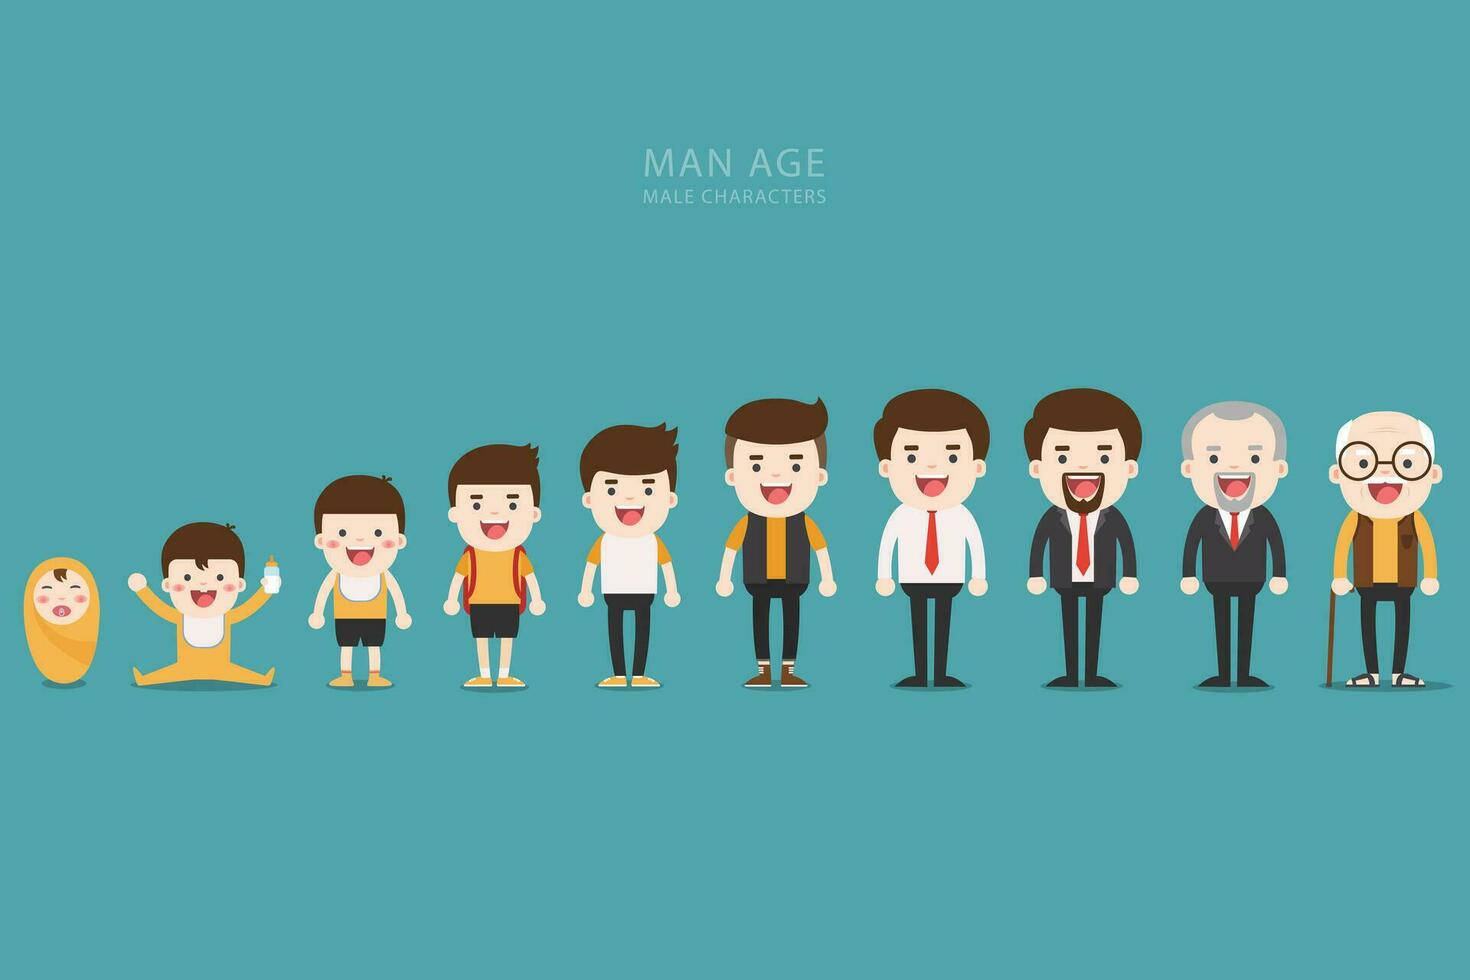 Aging concept of male characters, the cycle of life from childhood to old age vector